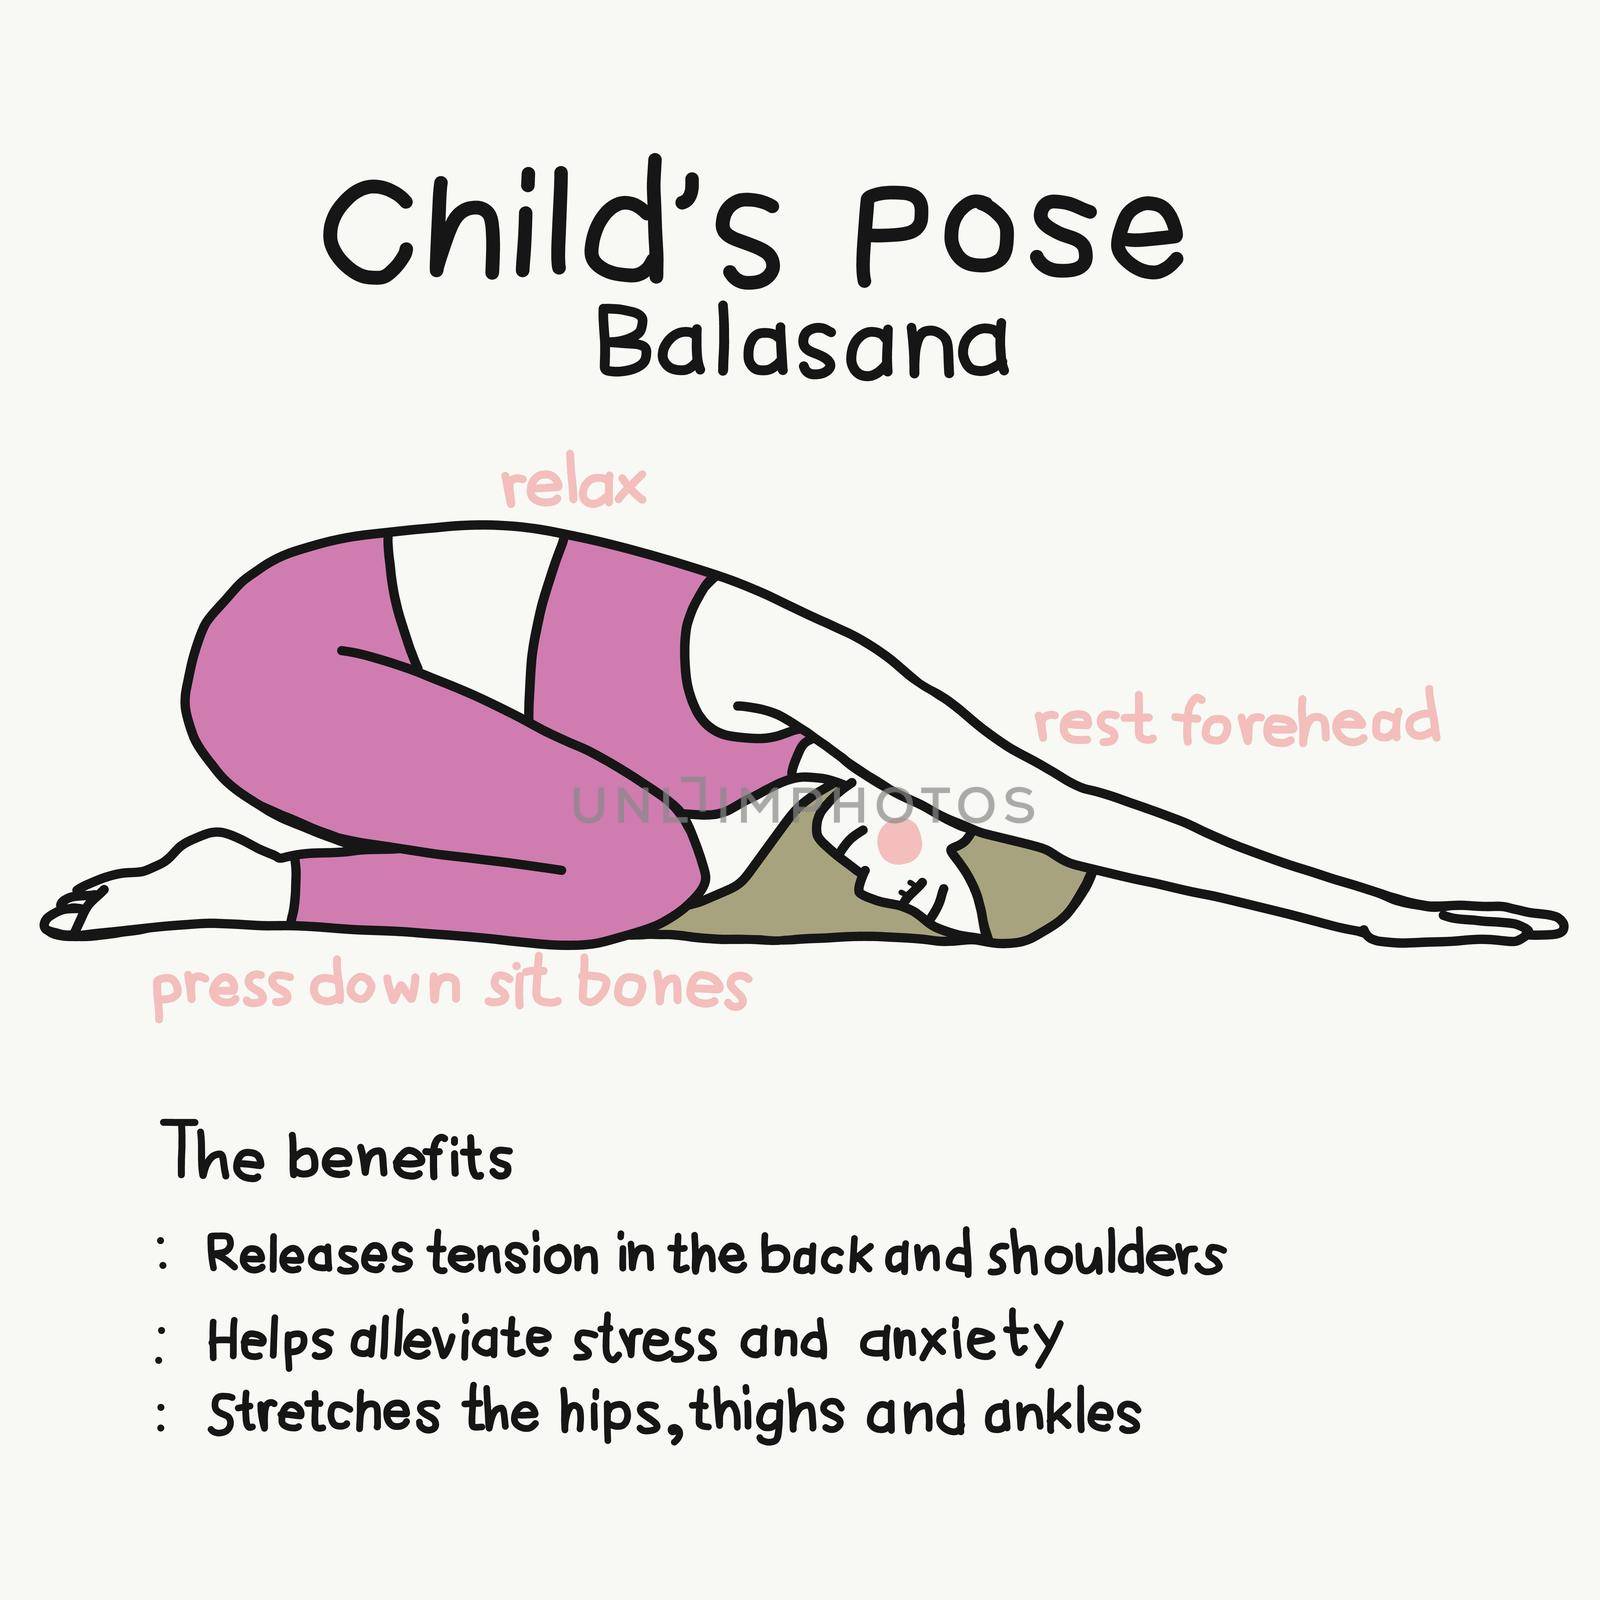 Child's pose yoga pose and benefits cartoon vector illustration by Yoopho